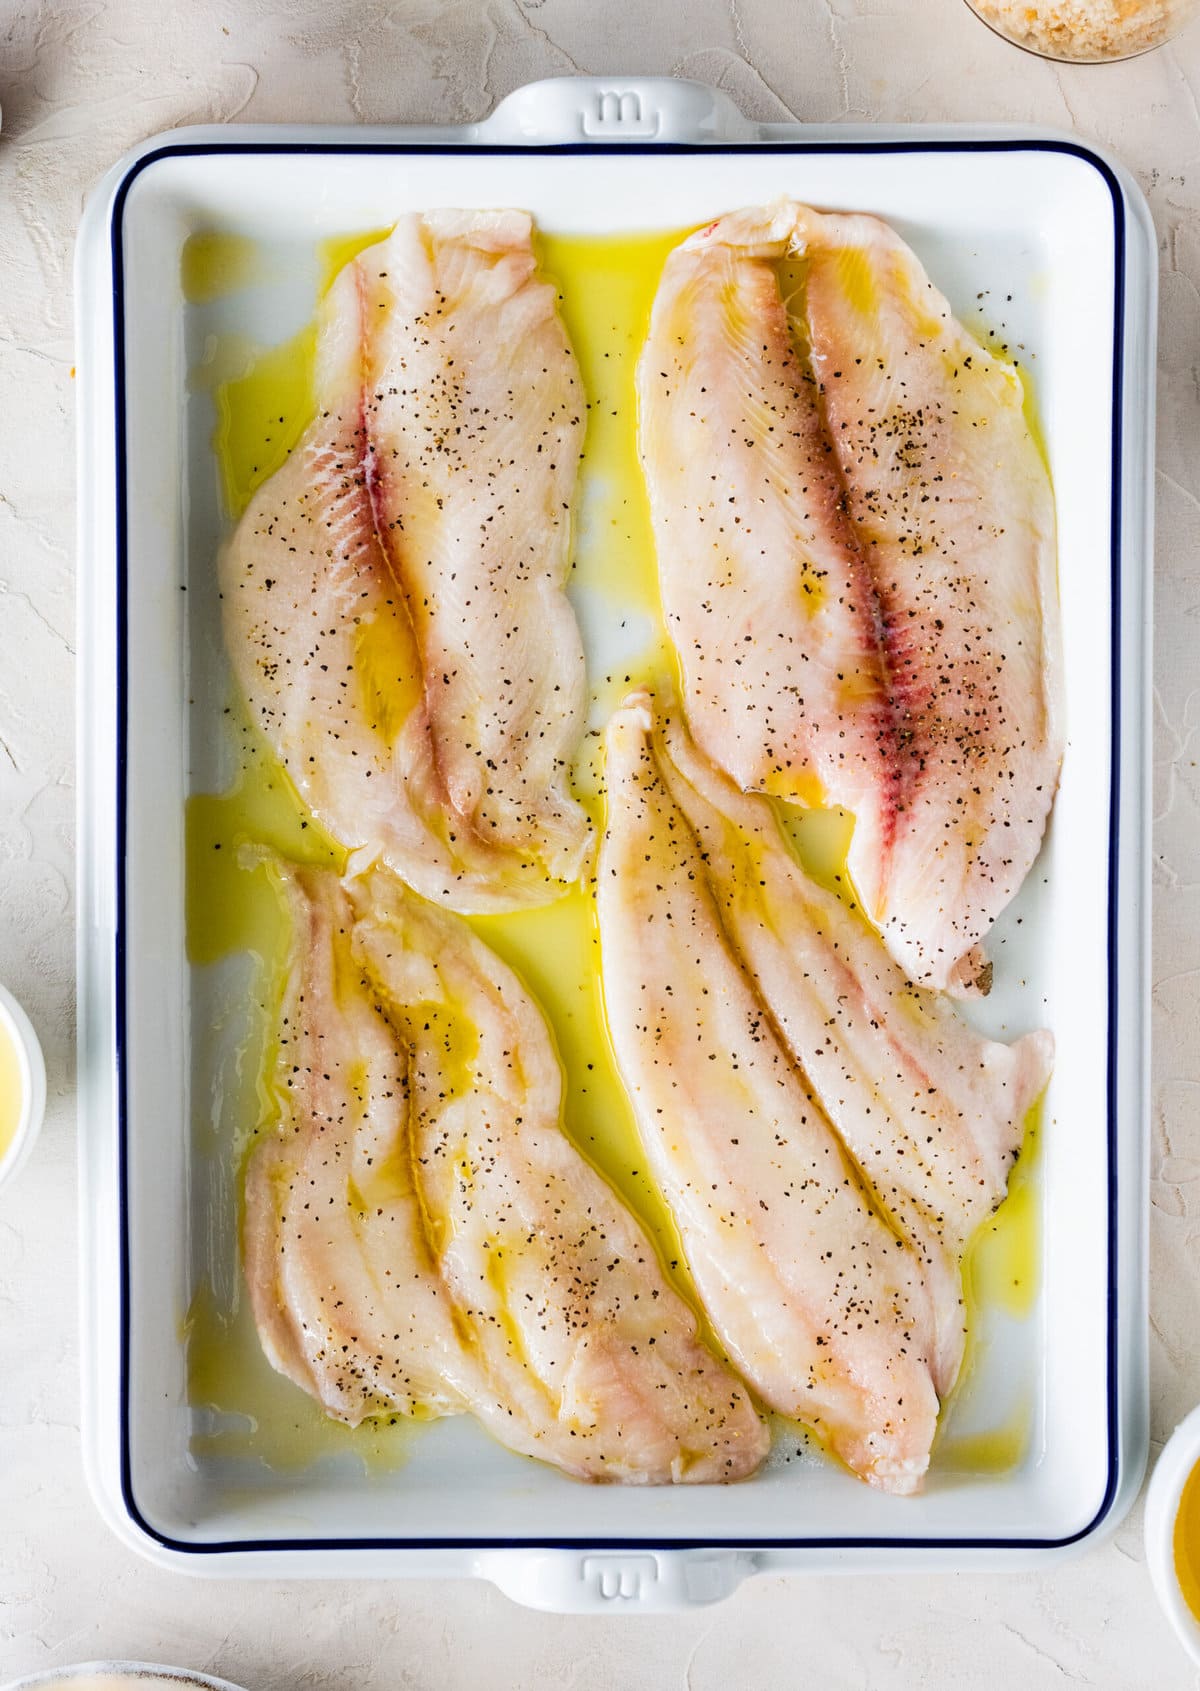 How to make-Baked Flounder Recipe with Lemon Butter Garlic Sauce- adding the fish to the pan with olive oil.